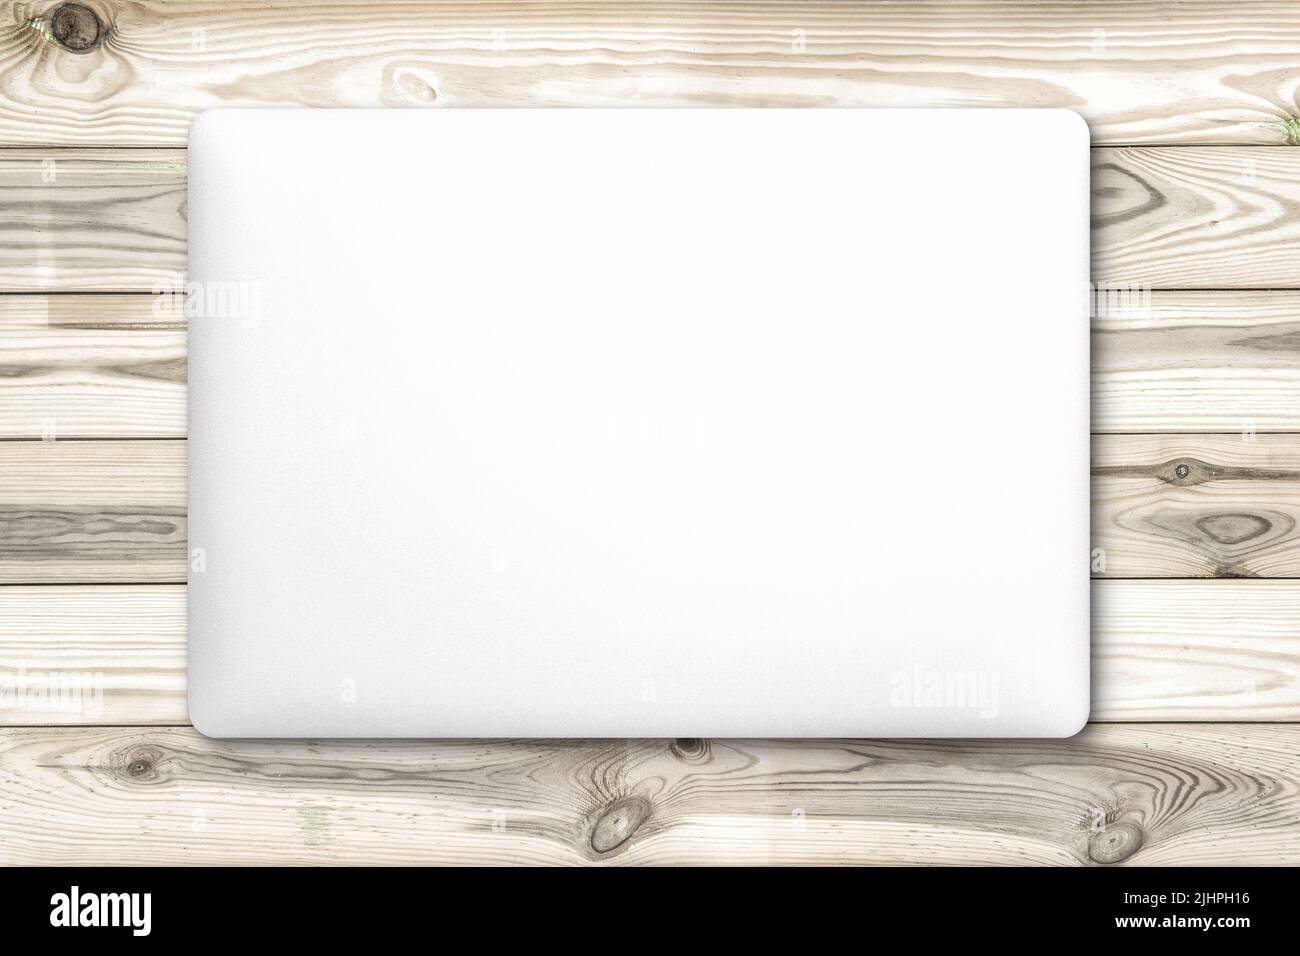 Laptop mock up on wooden background. Office workspace flat lay Stock Photo